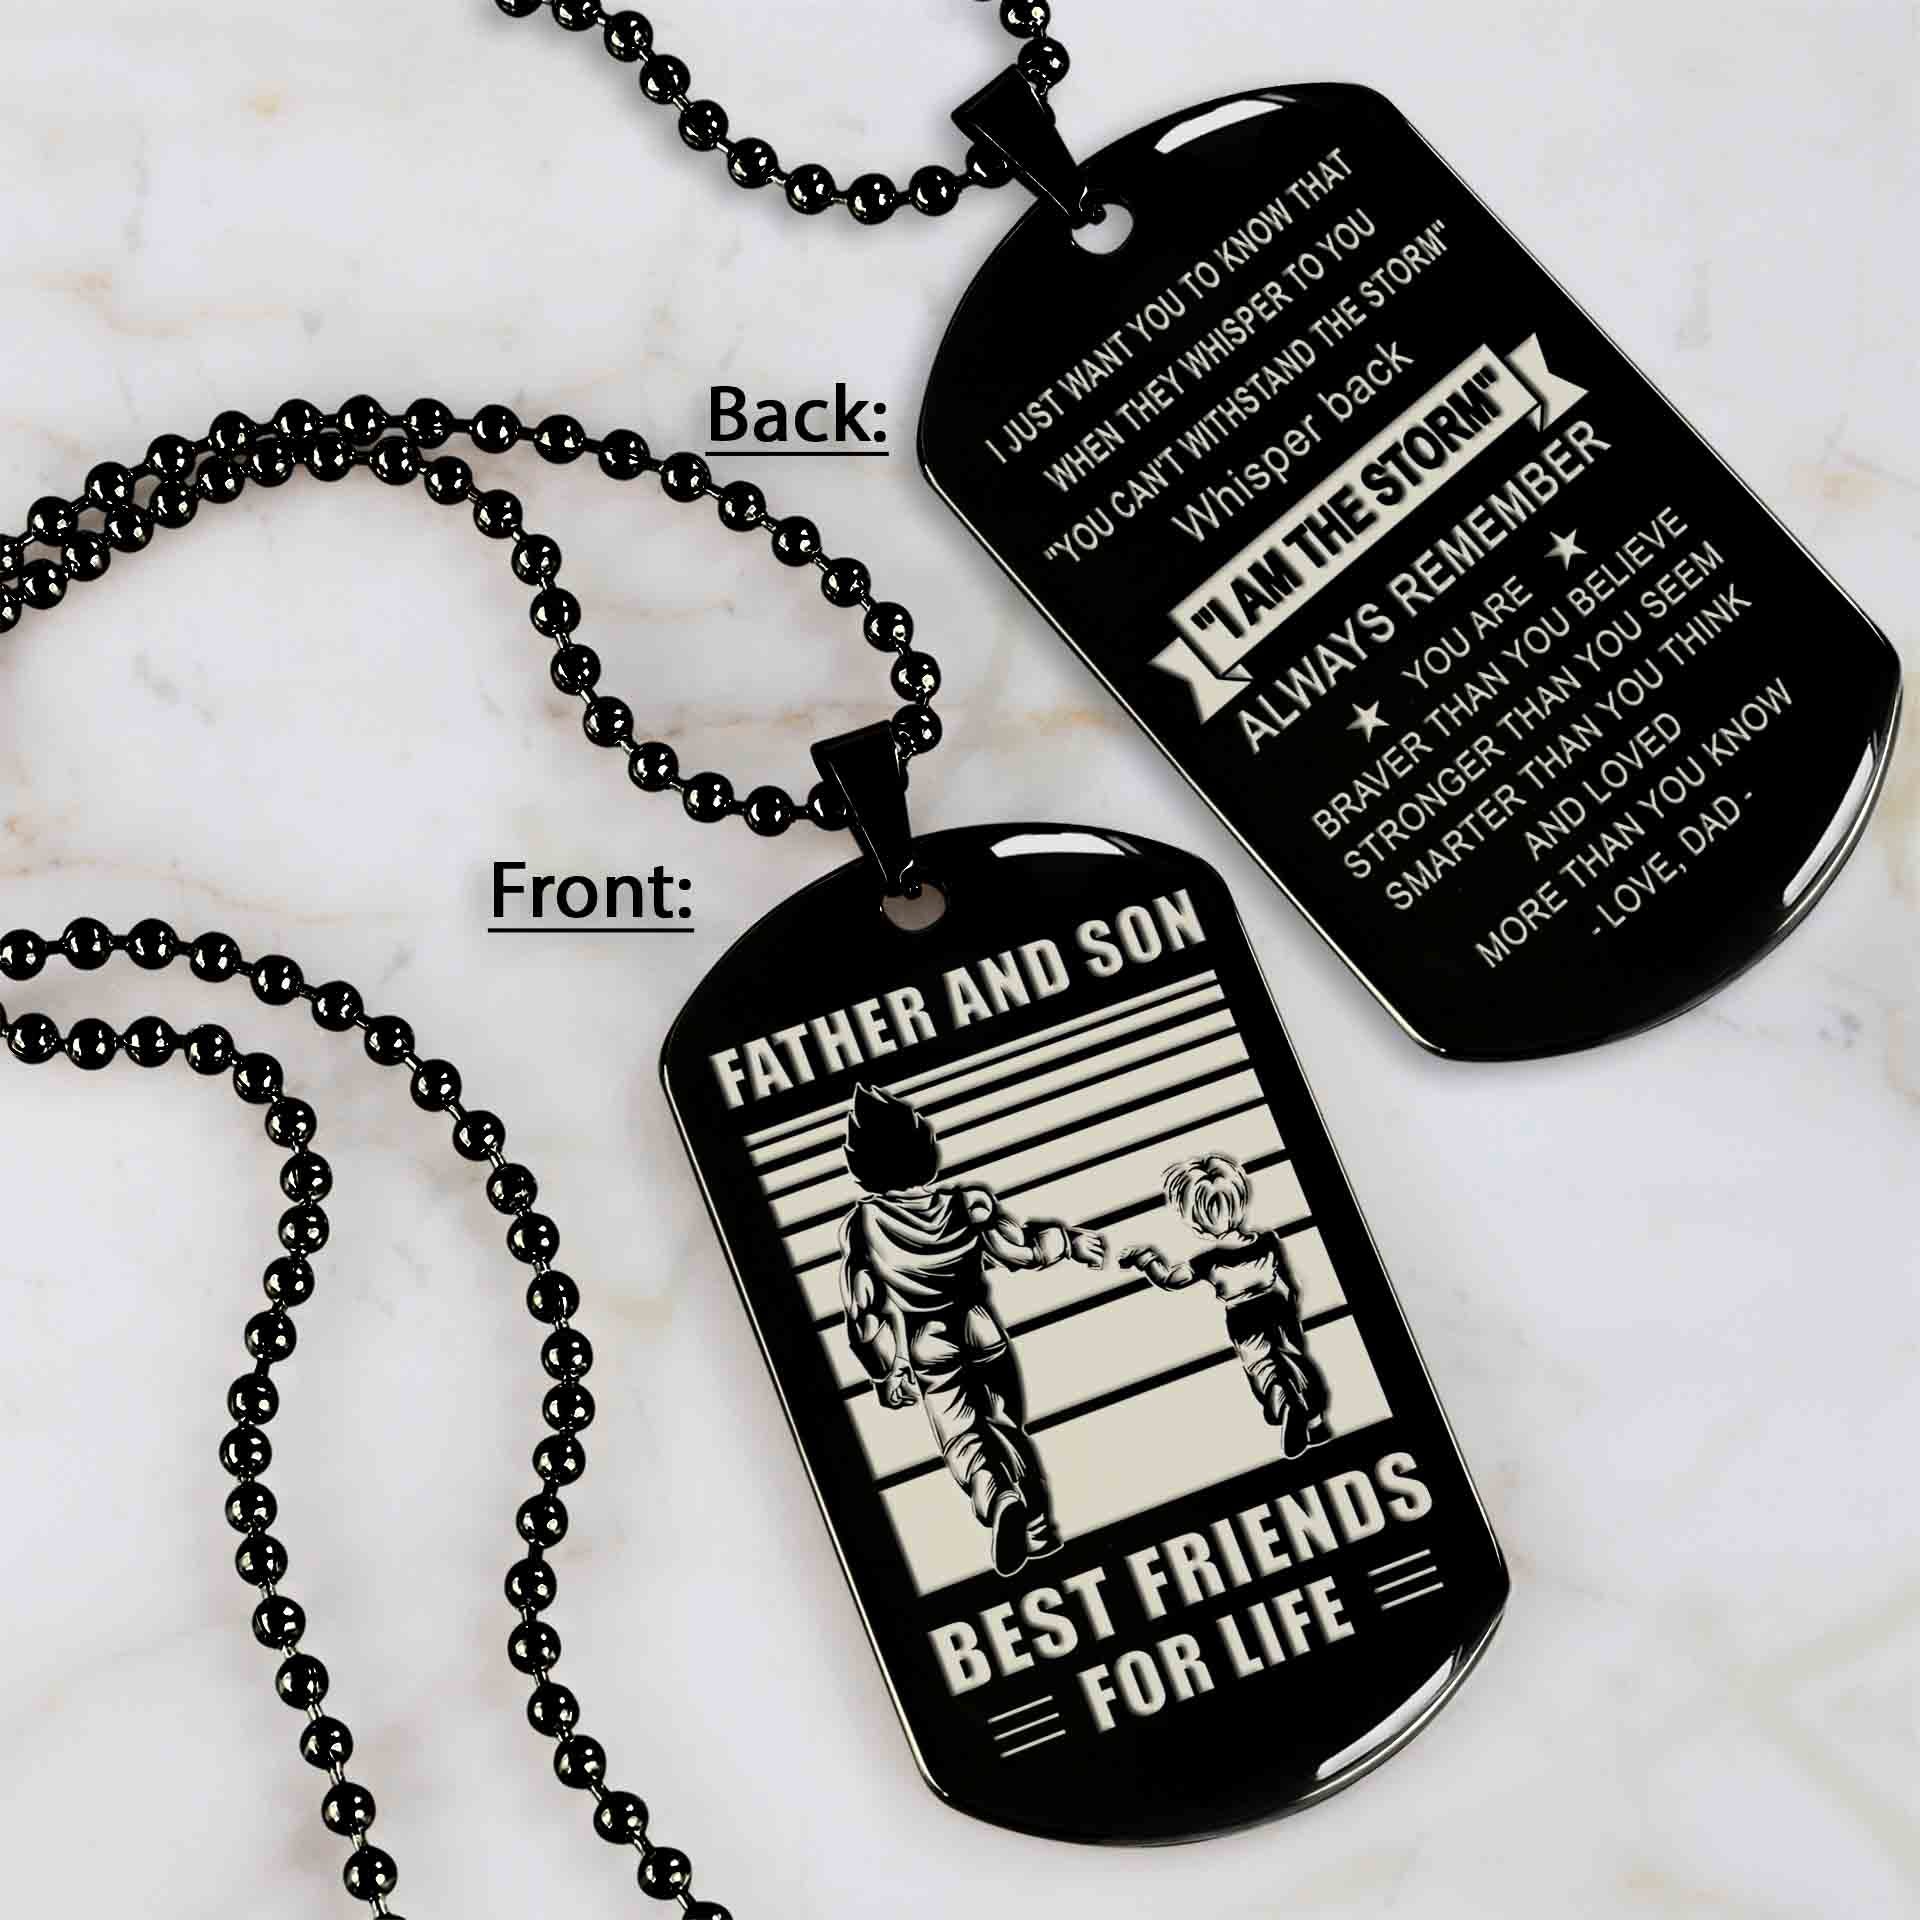 TM12 - Dad Son- Alway remember you are braver than you believe - Dog Tag Two Side- Dragon Ball - Viking-Dad Son- Family